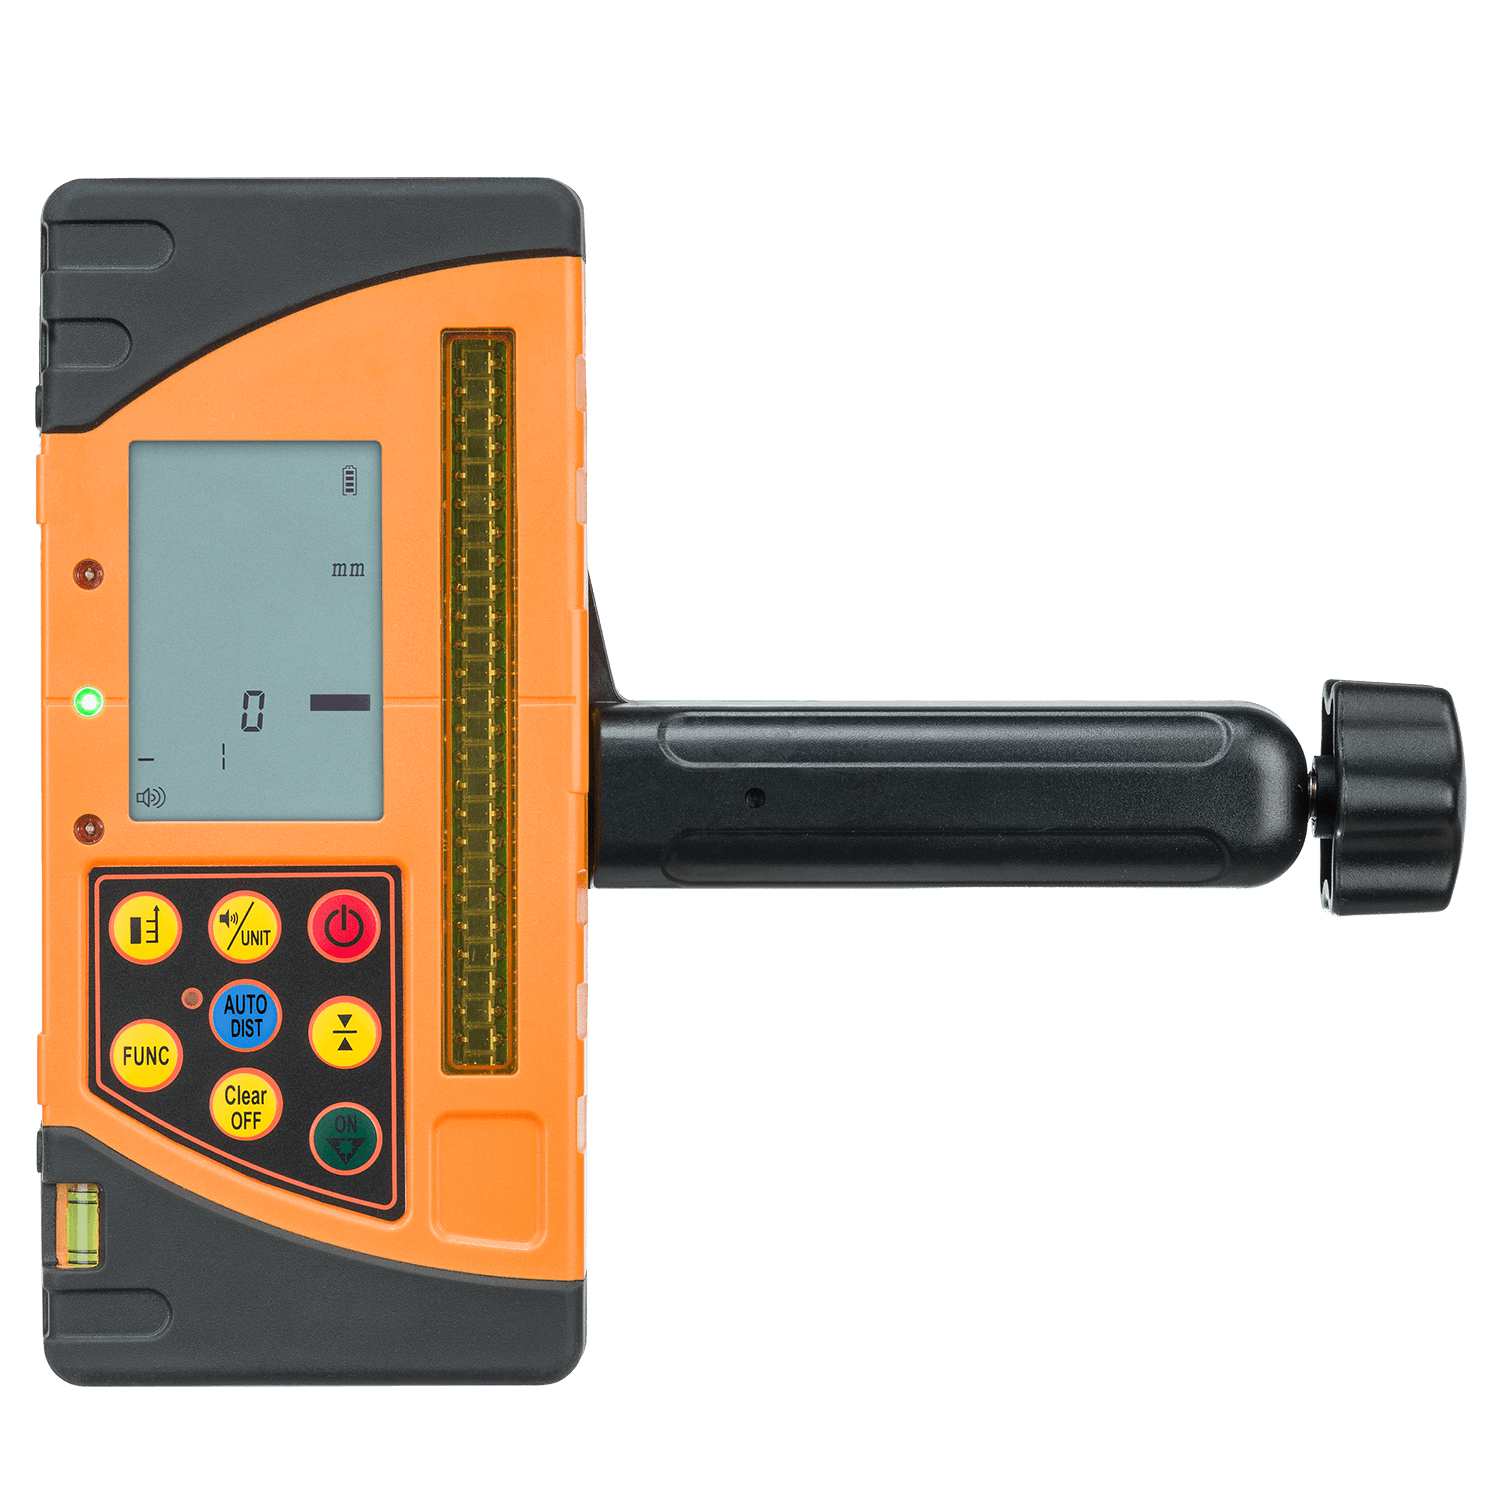 FR-DIST 30 Rotary Laser Receiver with Integrated Laser Distance Meter 01